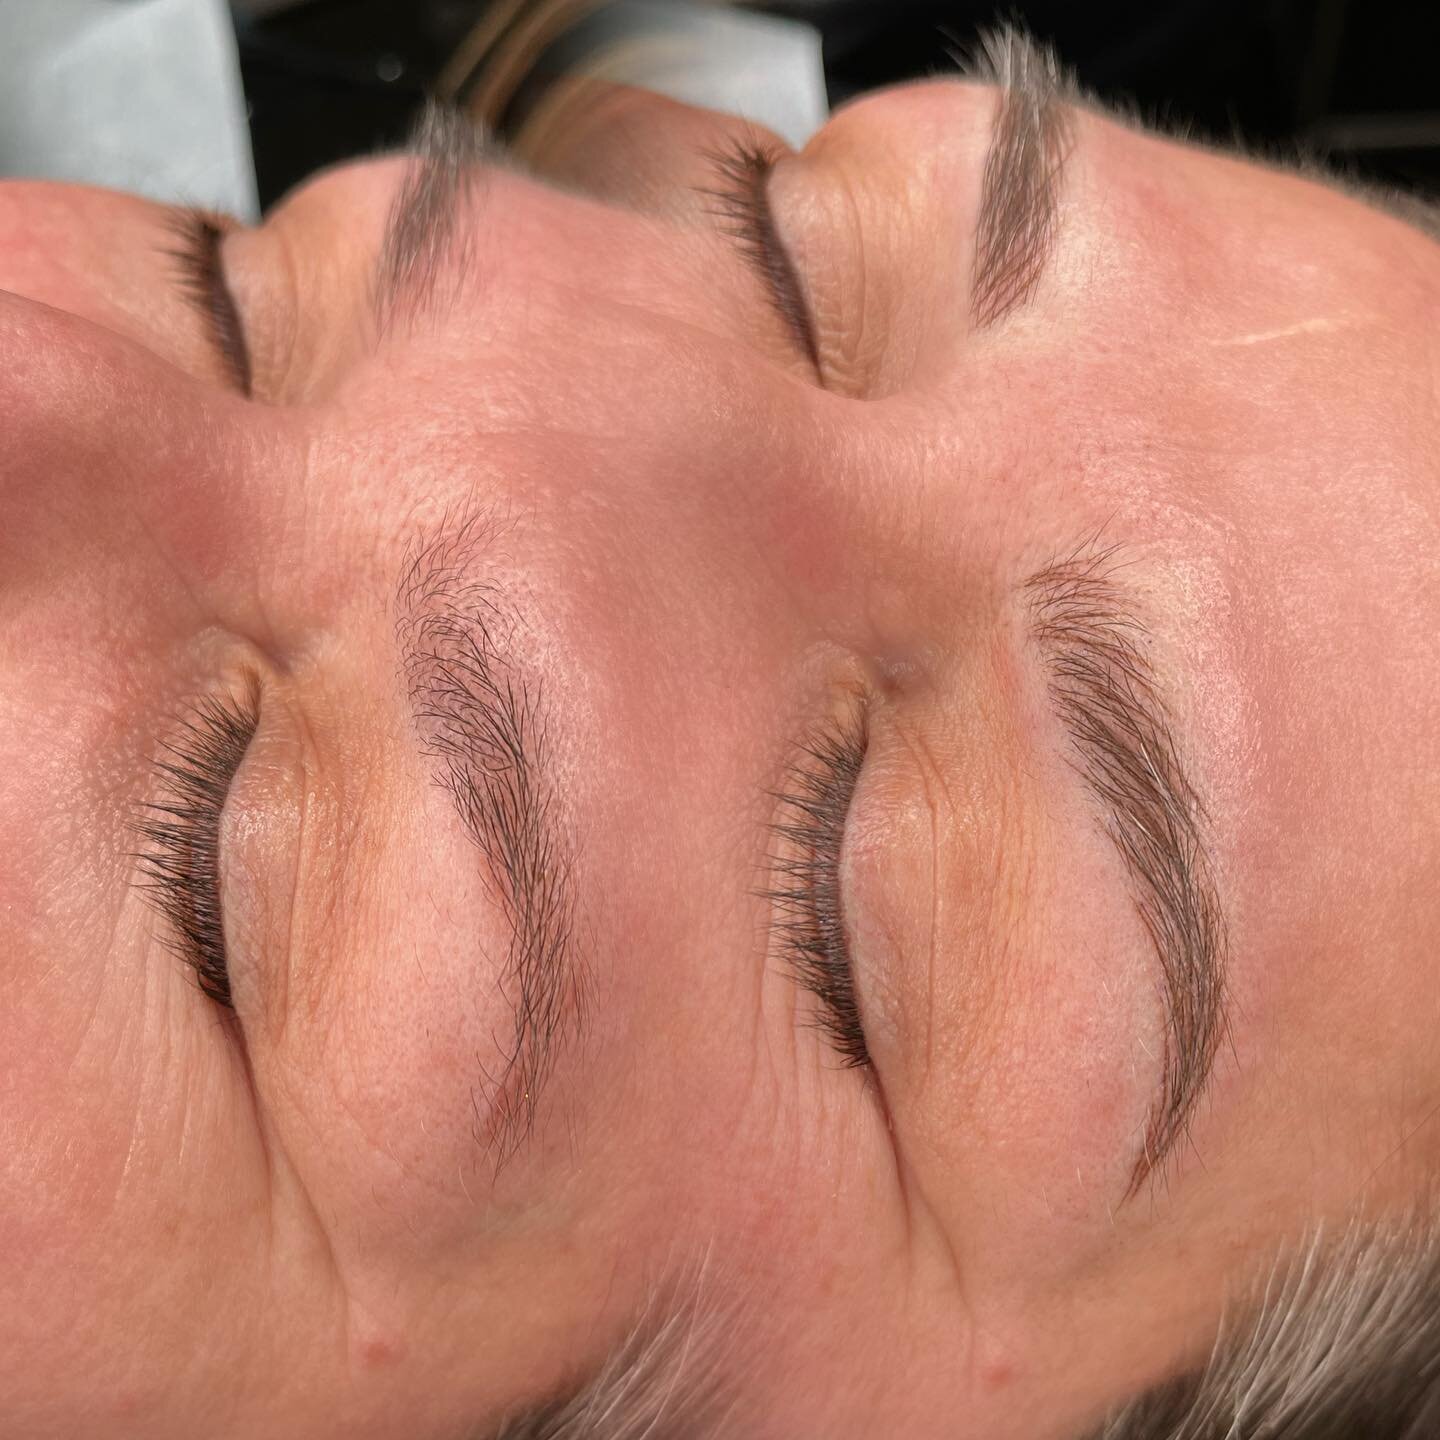 ✨Nano Brows ✨ These transformations feel like magic every time 🥲🔮💓
.
.
.
.
.
 #nanobrows #hairstrokebrows #beforeandafter #losangelesnanobrows #nanobrowslosangeles #losangelestattoo